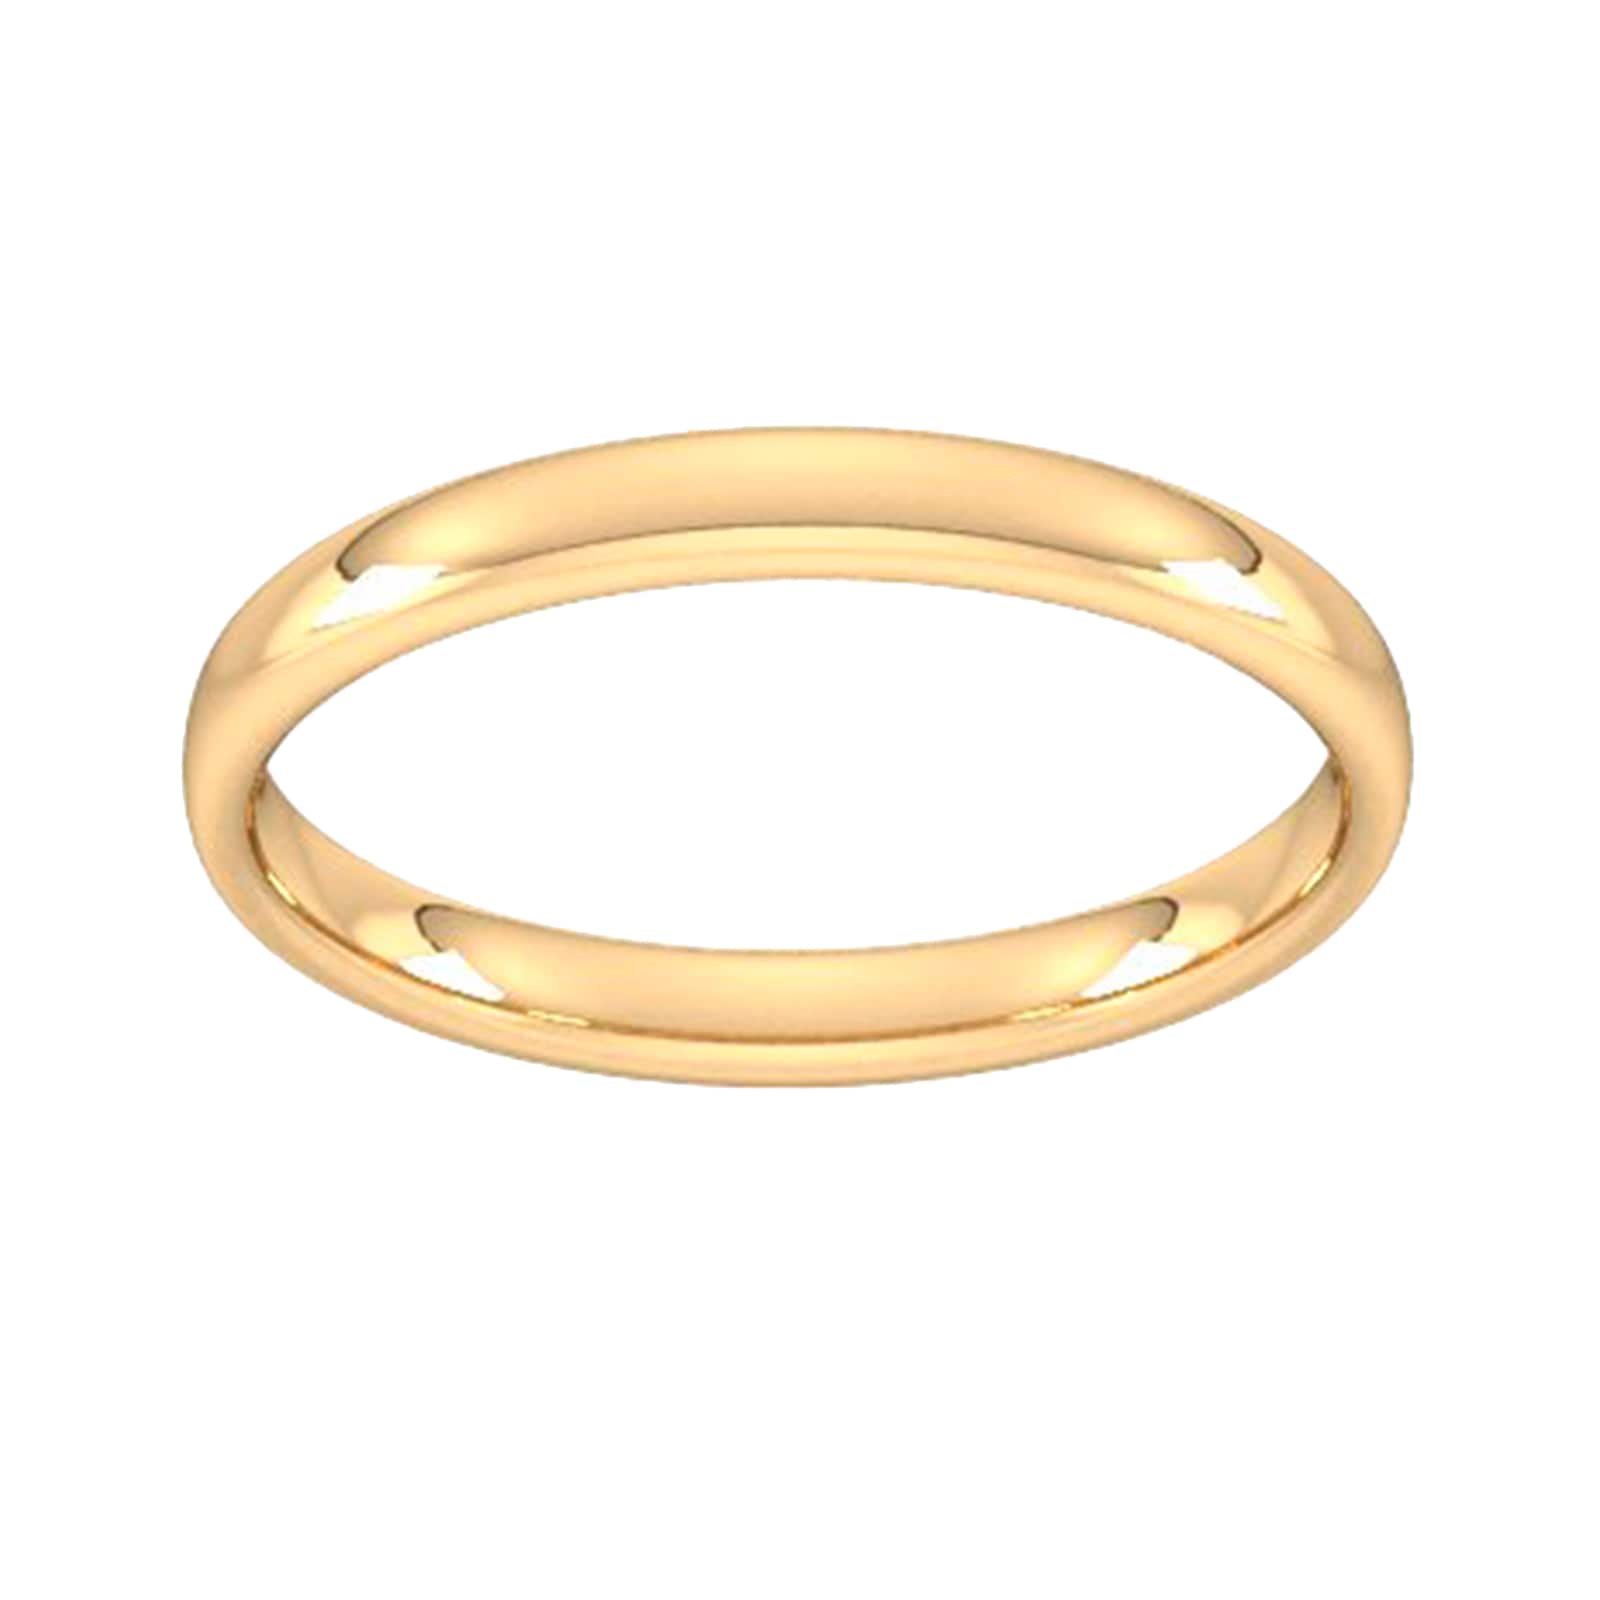 2.5mm Slight Court Standard Wedding Ring In 18 Carat Yellow Gold - Ring Size S